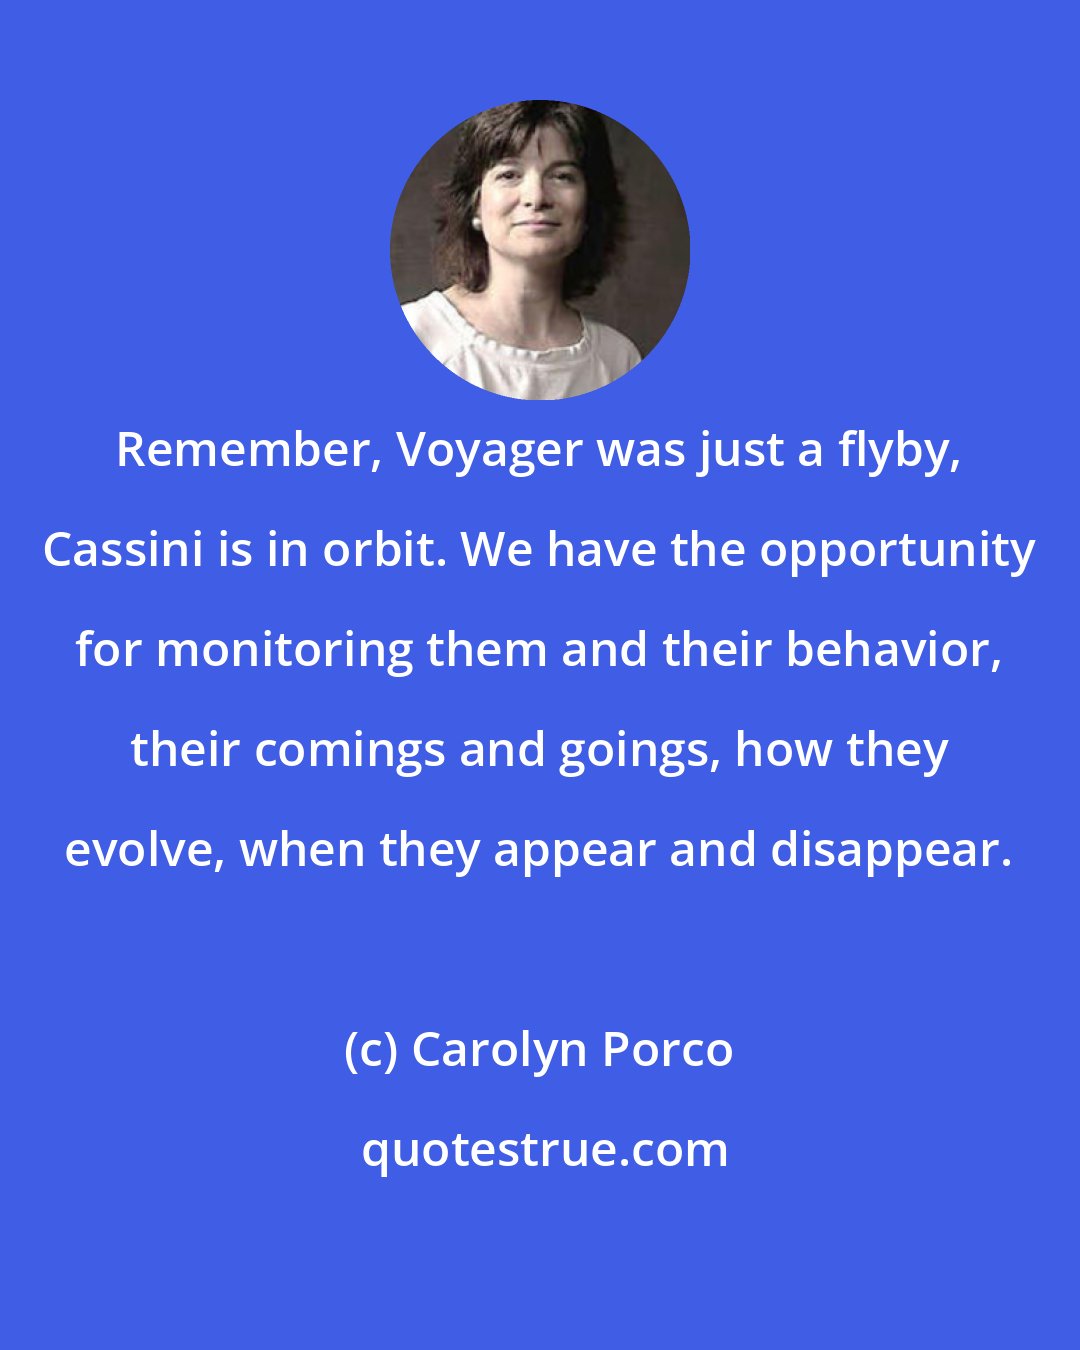 Carolyn Porco: Remember, Voyager was just a flyby, Cassini is in orbit. We have the opportunity for monitoring them and their behavior, their comings and goings, how they evolve, when they appear and disappear.